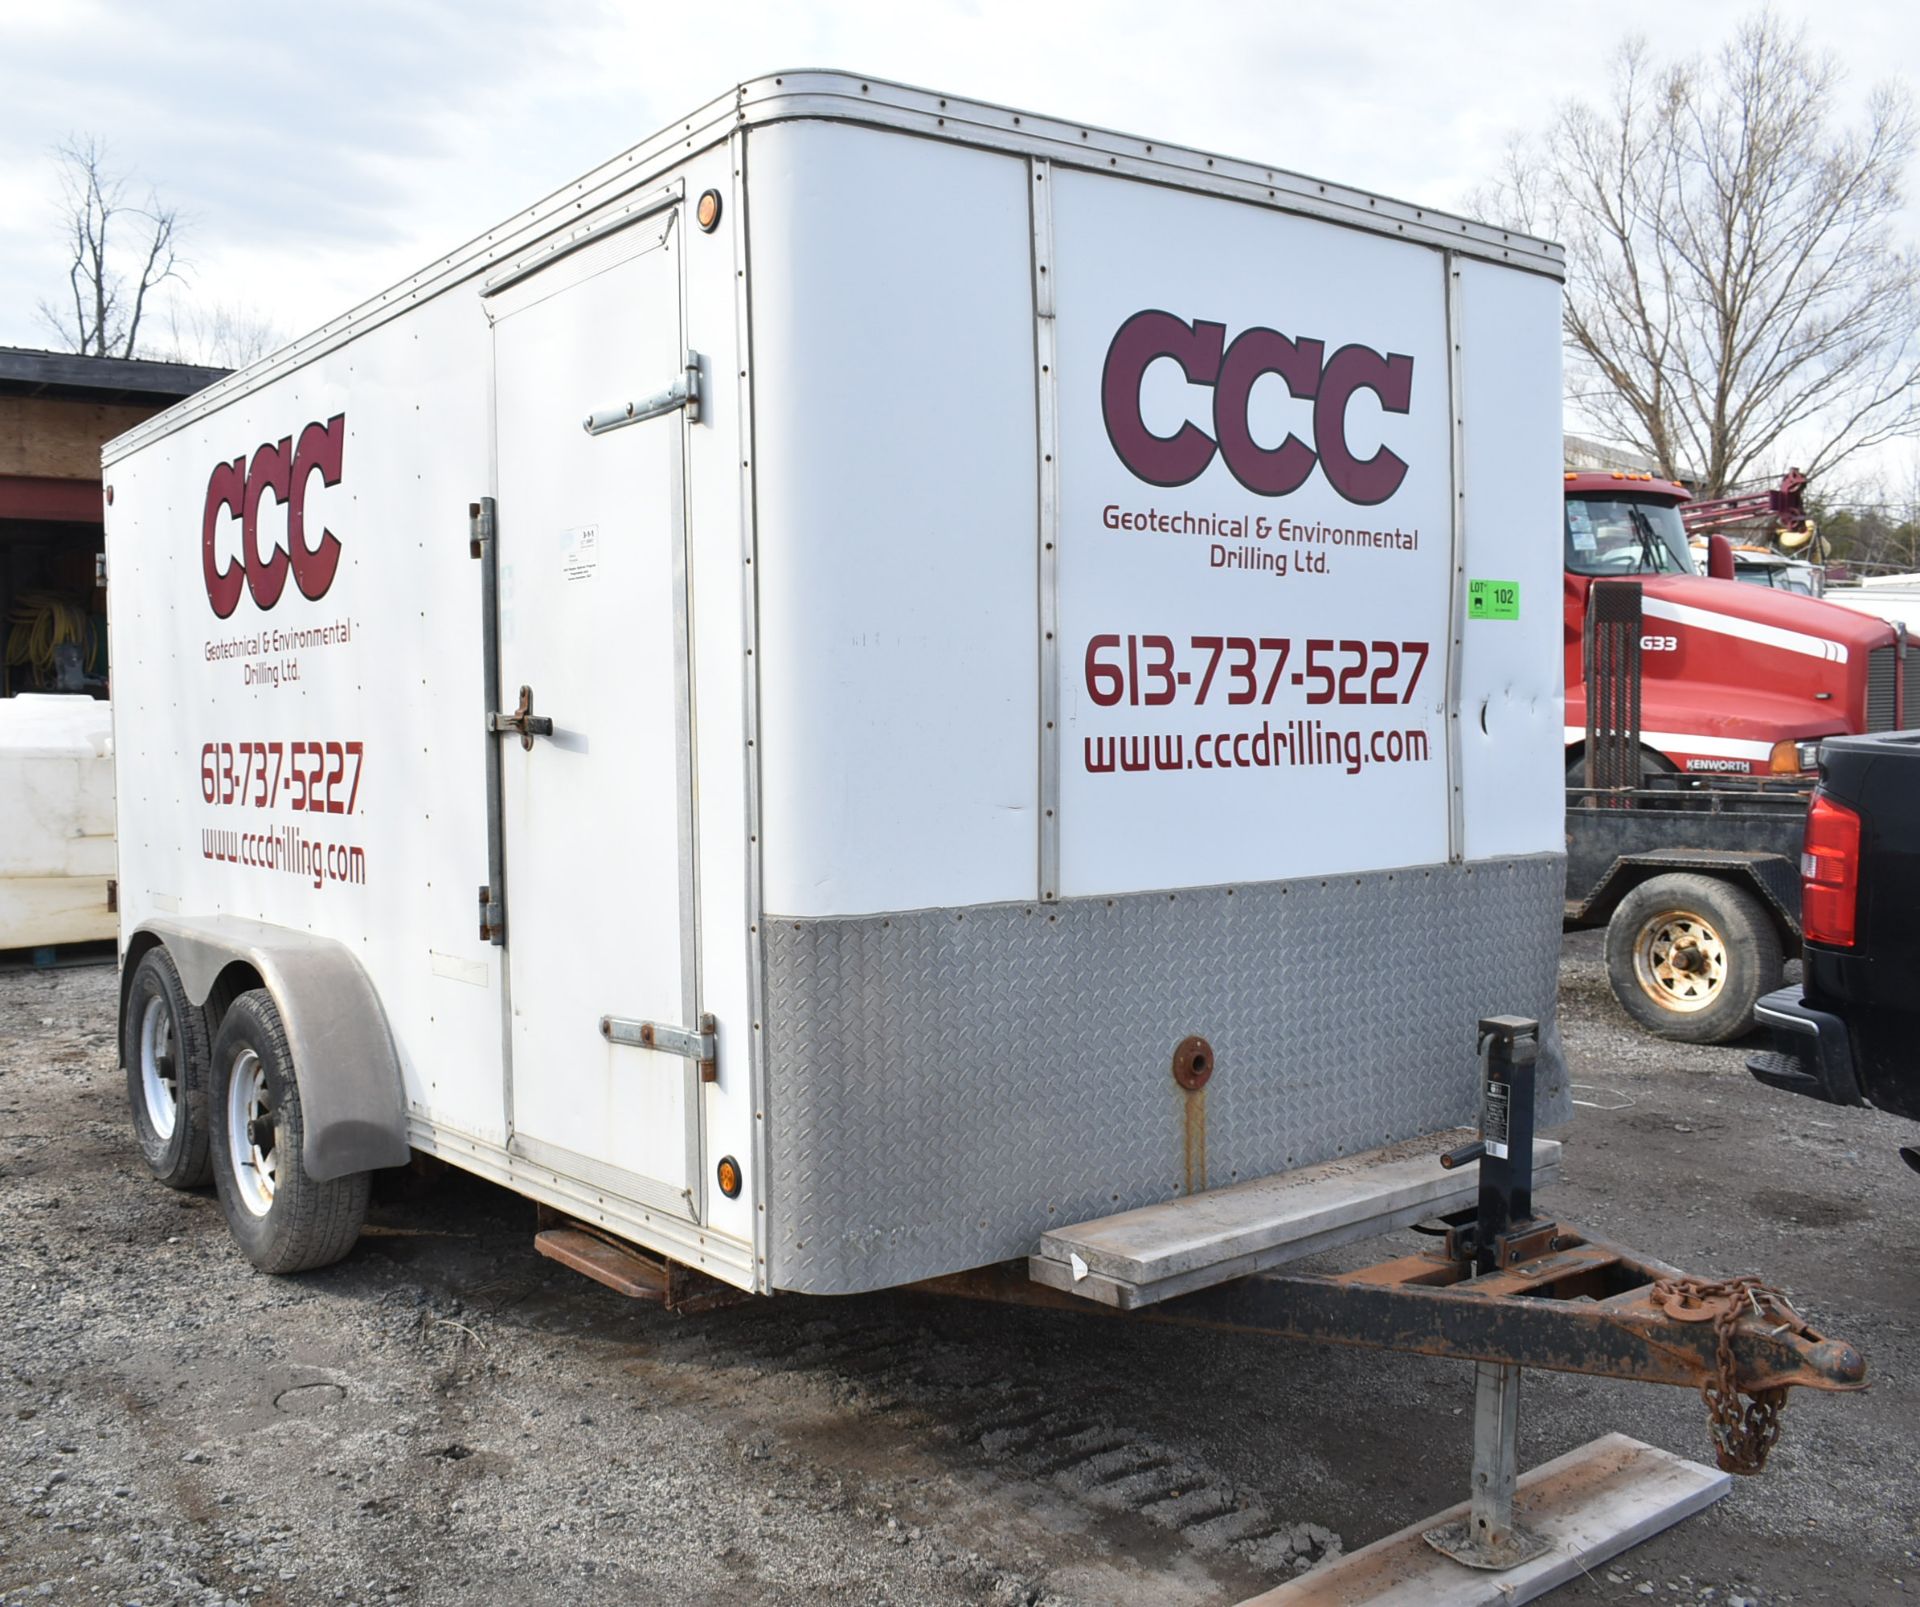 PULLRITE (2014) E-14 7' X 14' TANDEM AXLE ENCLOSED UTILITY TRAILER WITH 10,020 LB GVWR, VIN: - Image 4 of 6